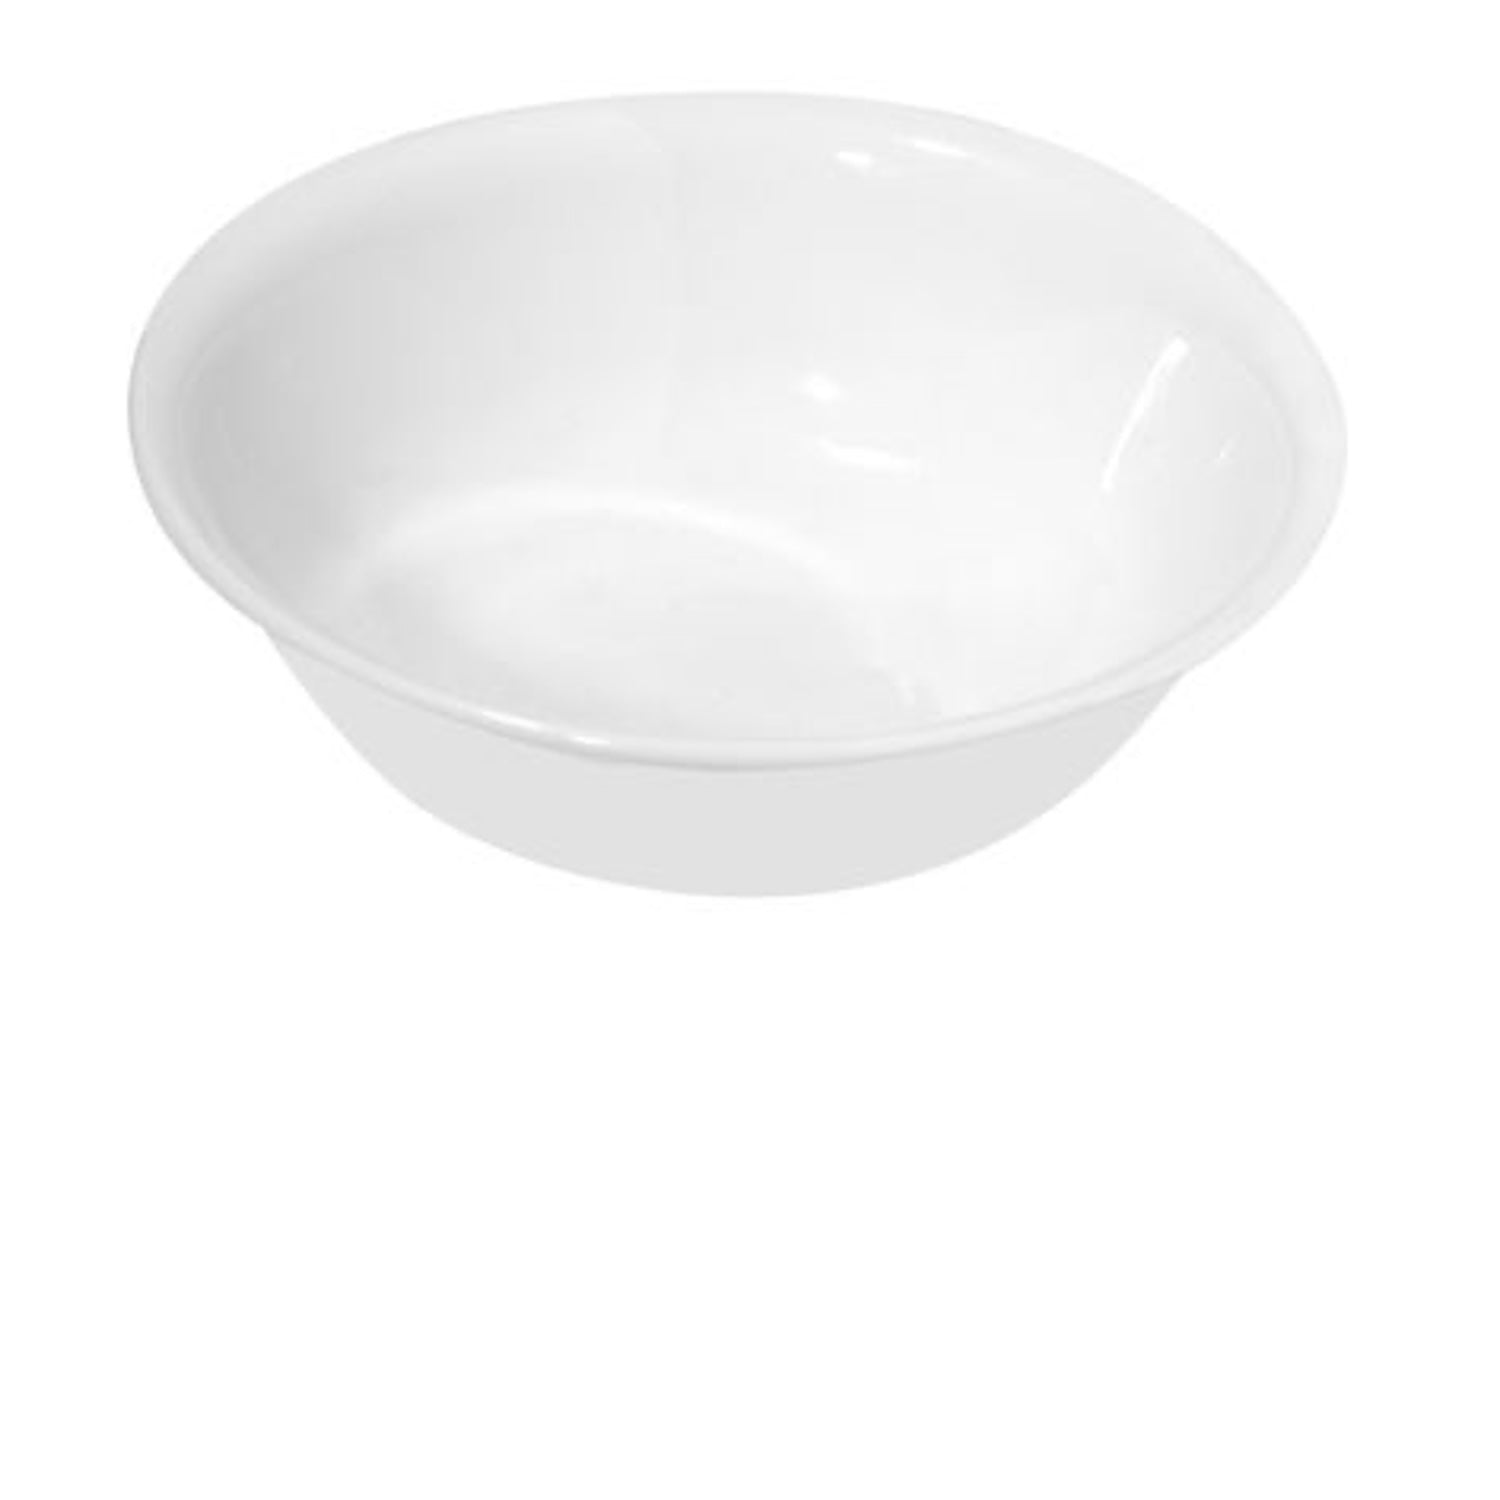 Winter Frost White Cereal Bowl